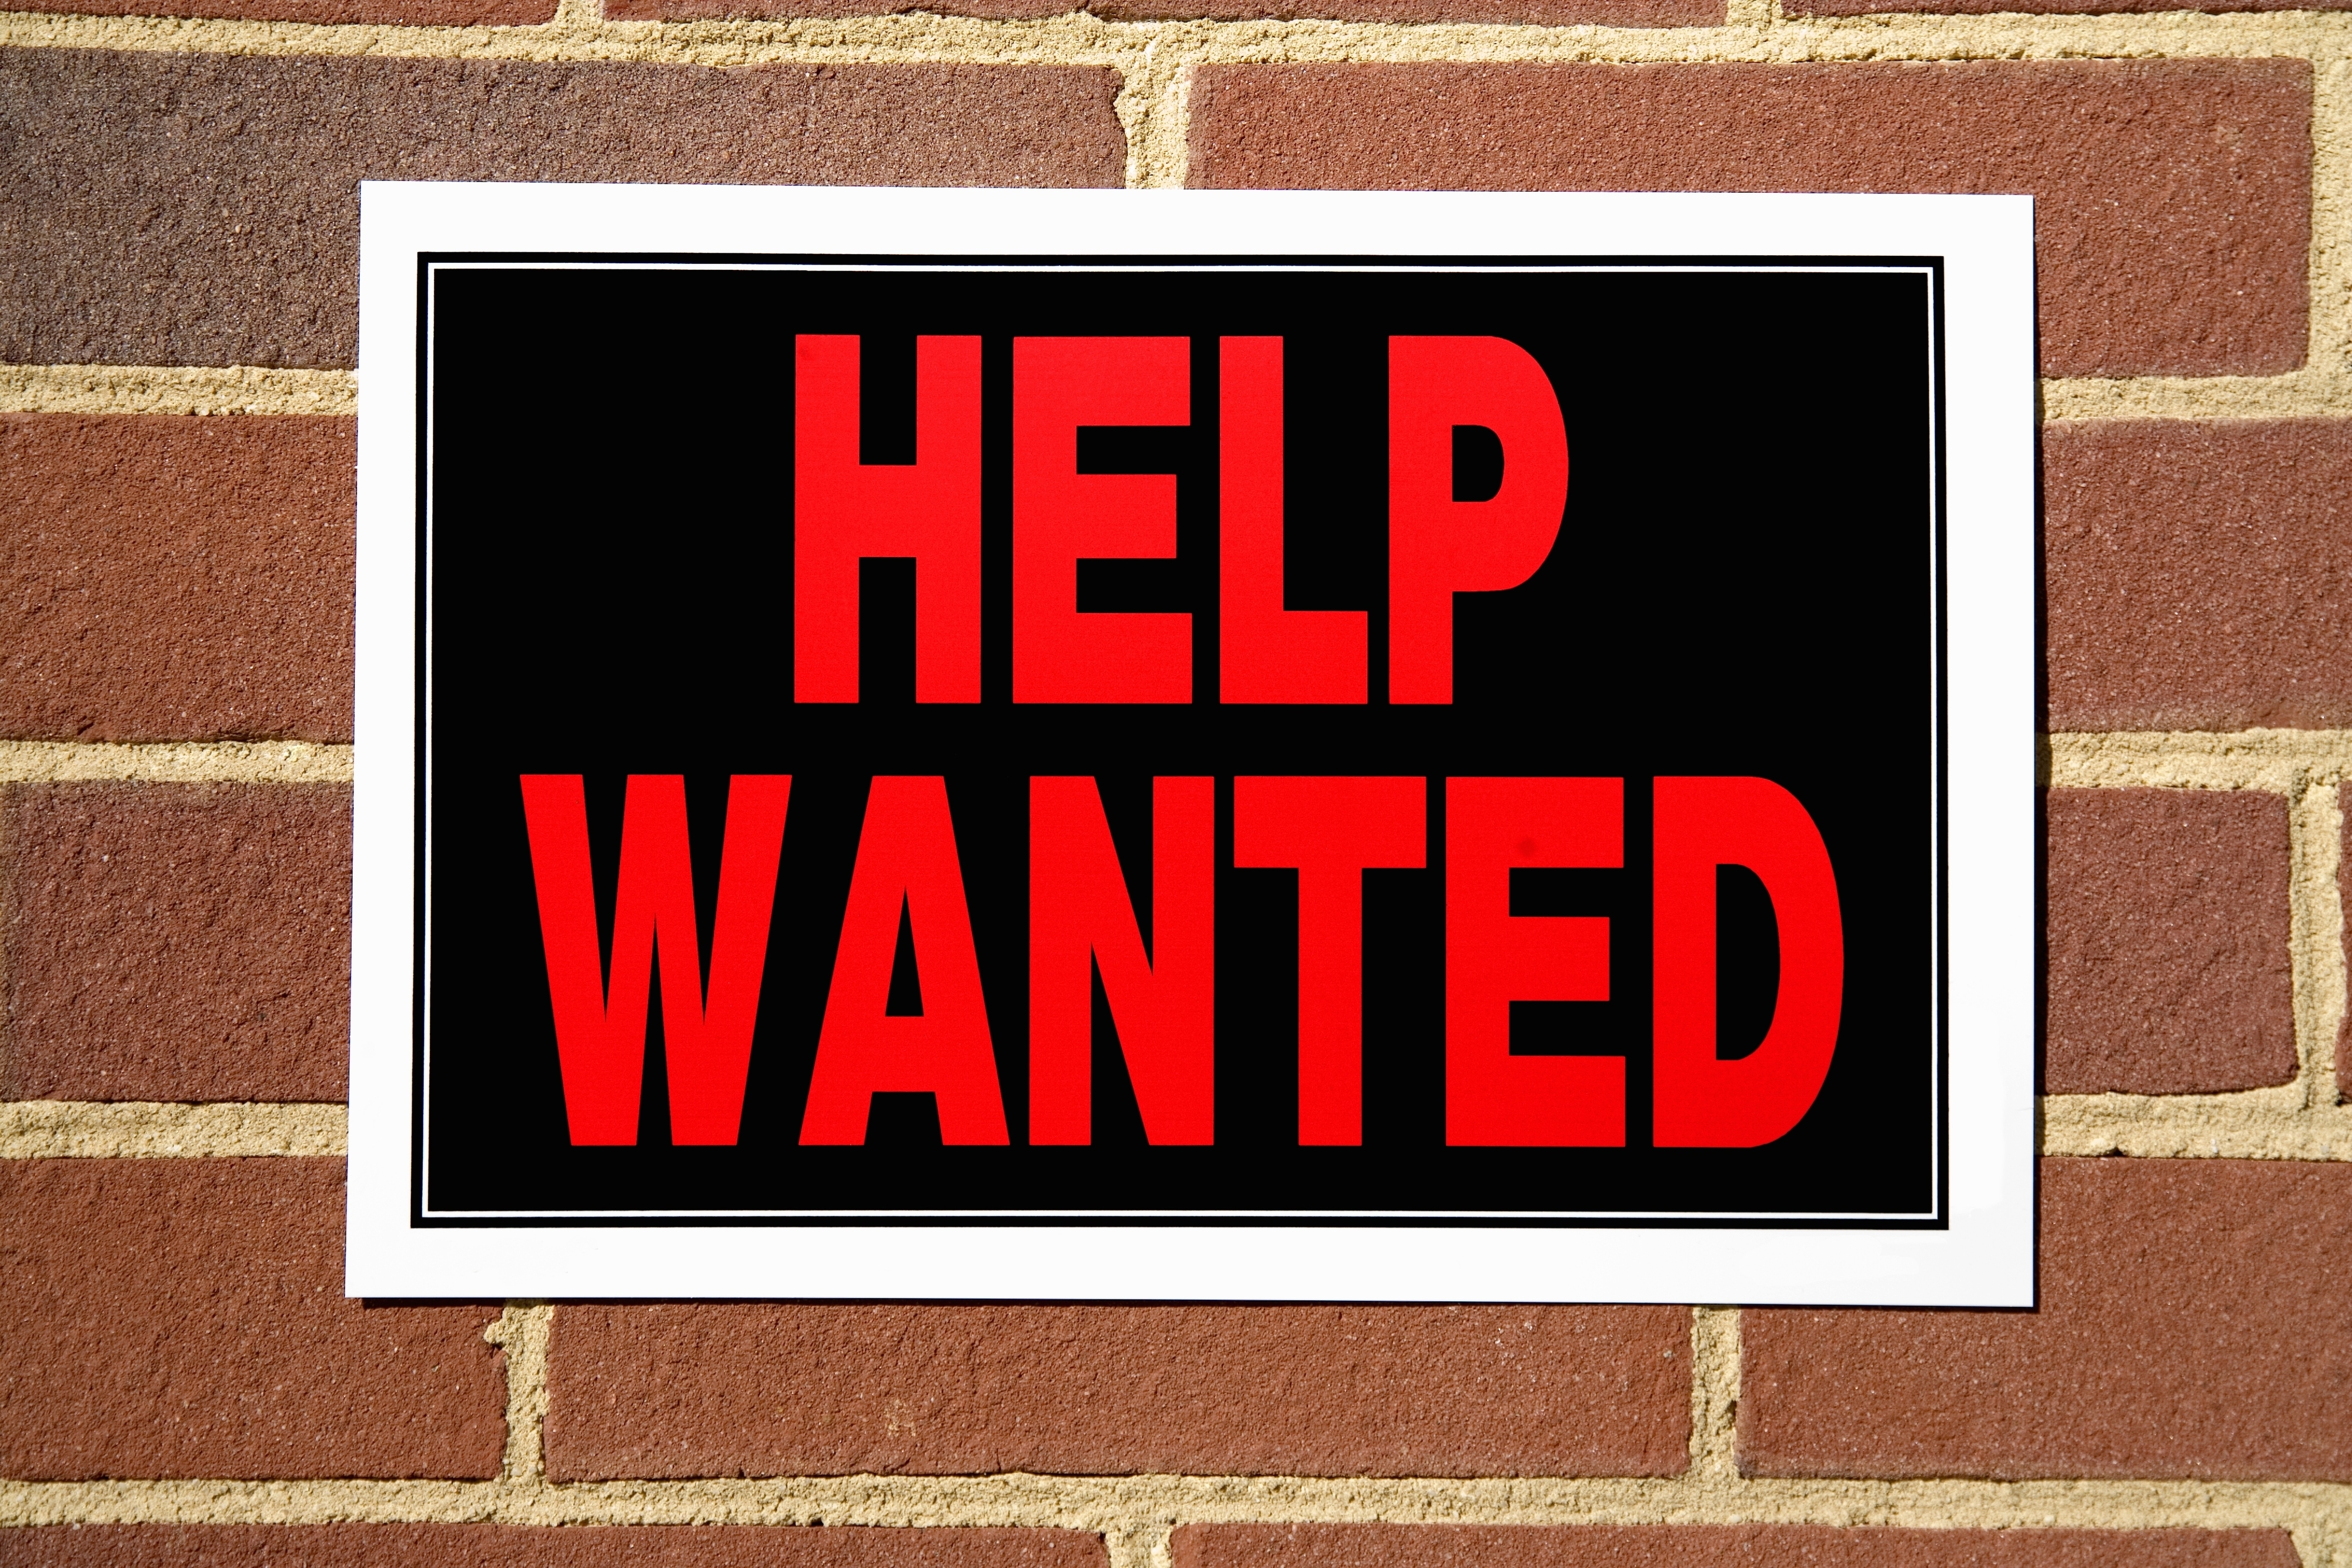 A &quot;Help Wanted&quot; sign on a brick wall